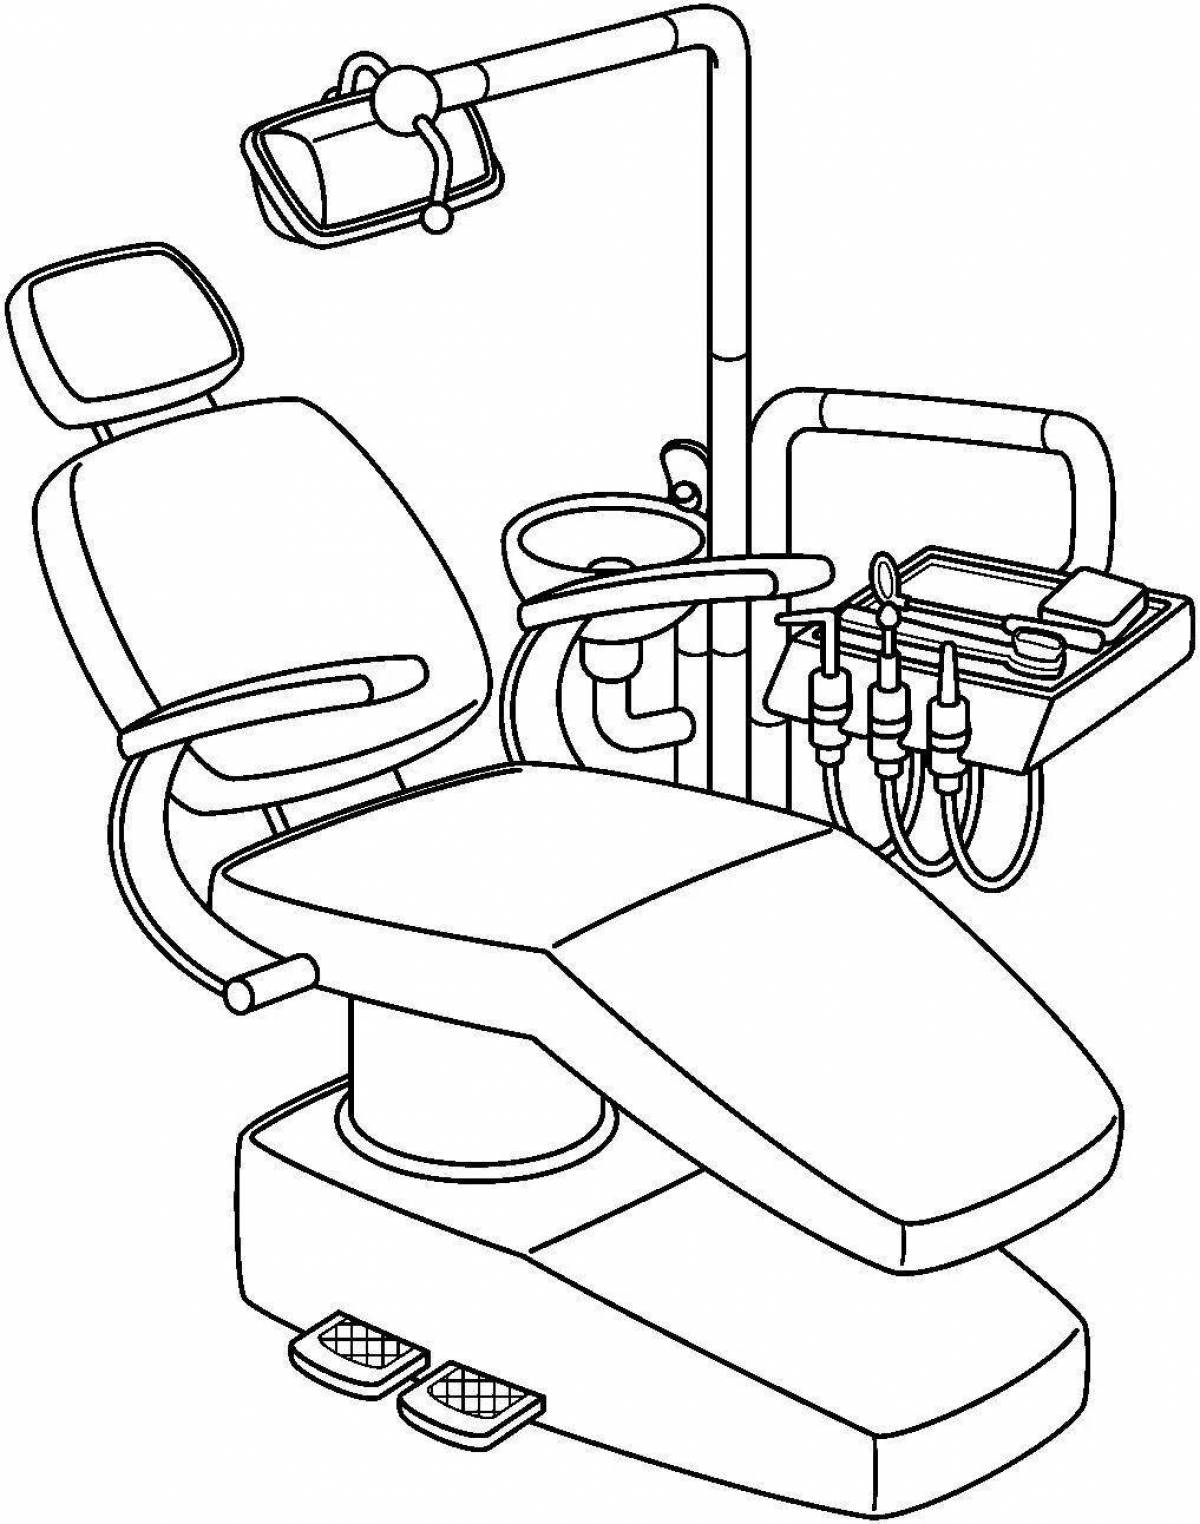 Funny dentistry coloring page